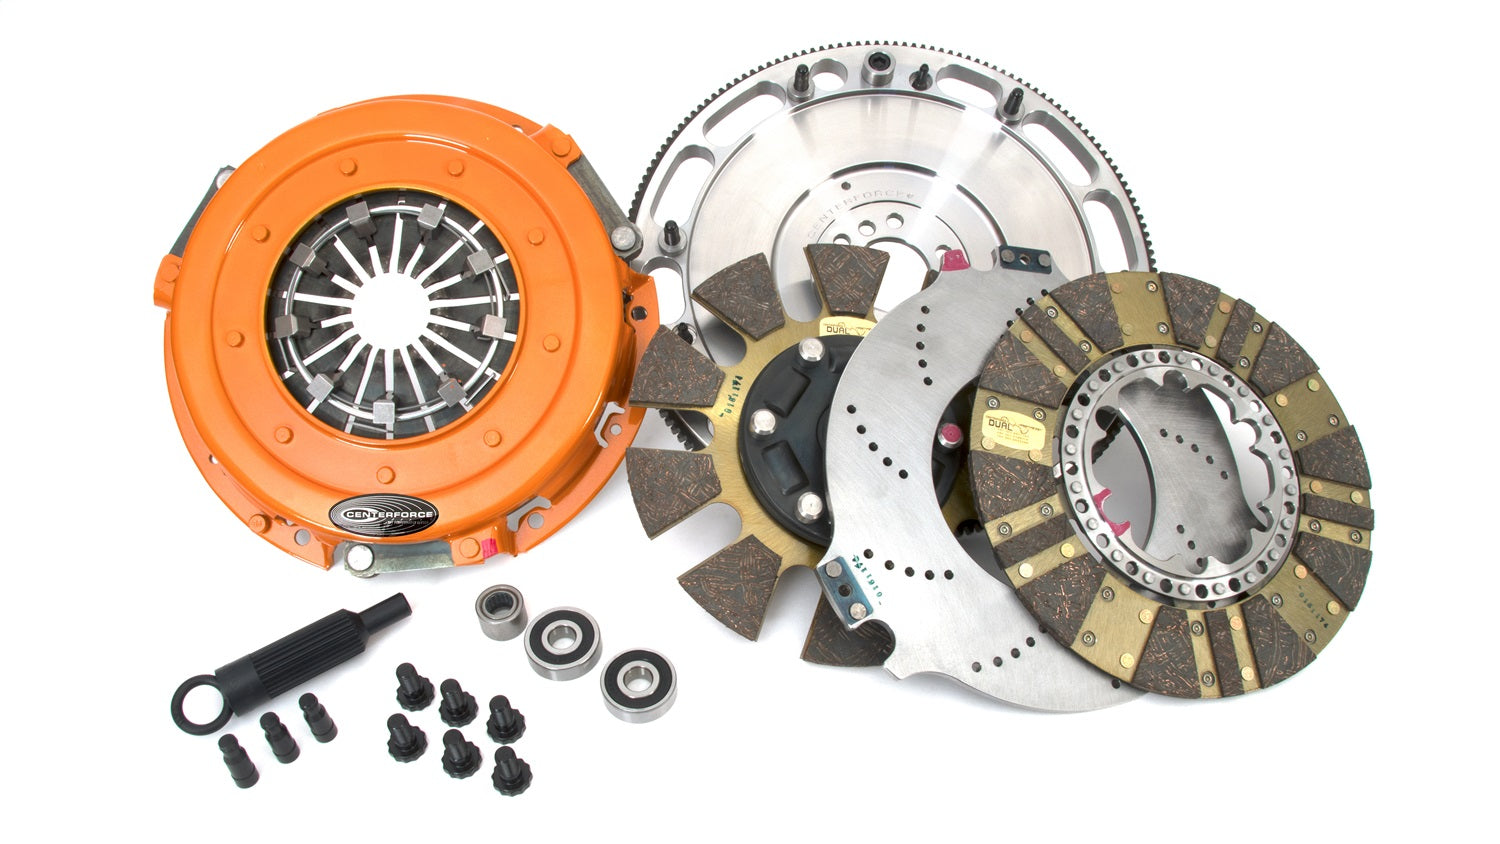 Centerforce 413614842 DYAD Clutch and Flywheel Kit Fits Camaro Corvette GTO